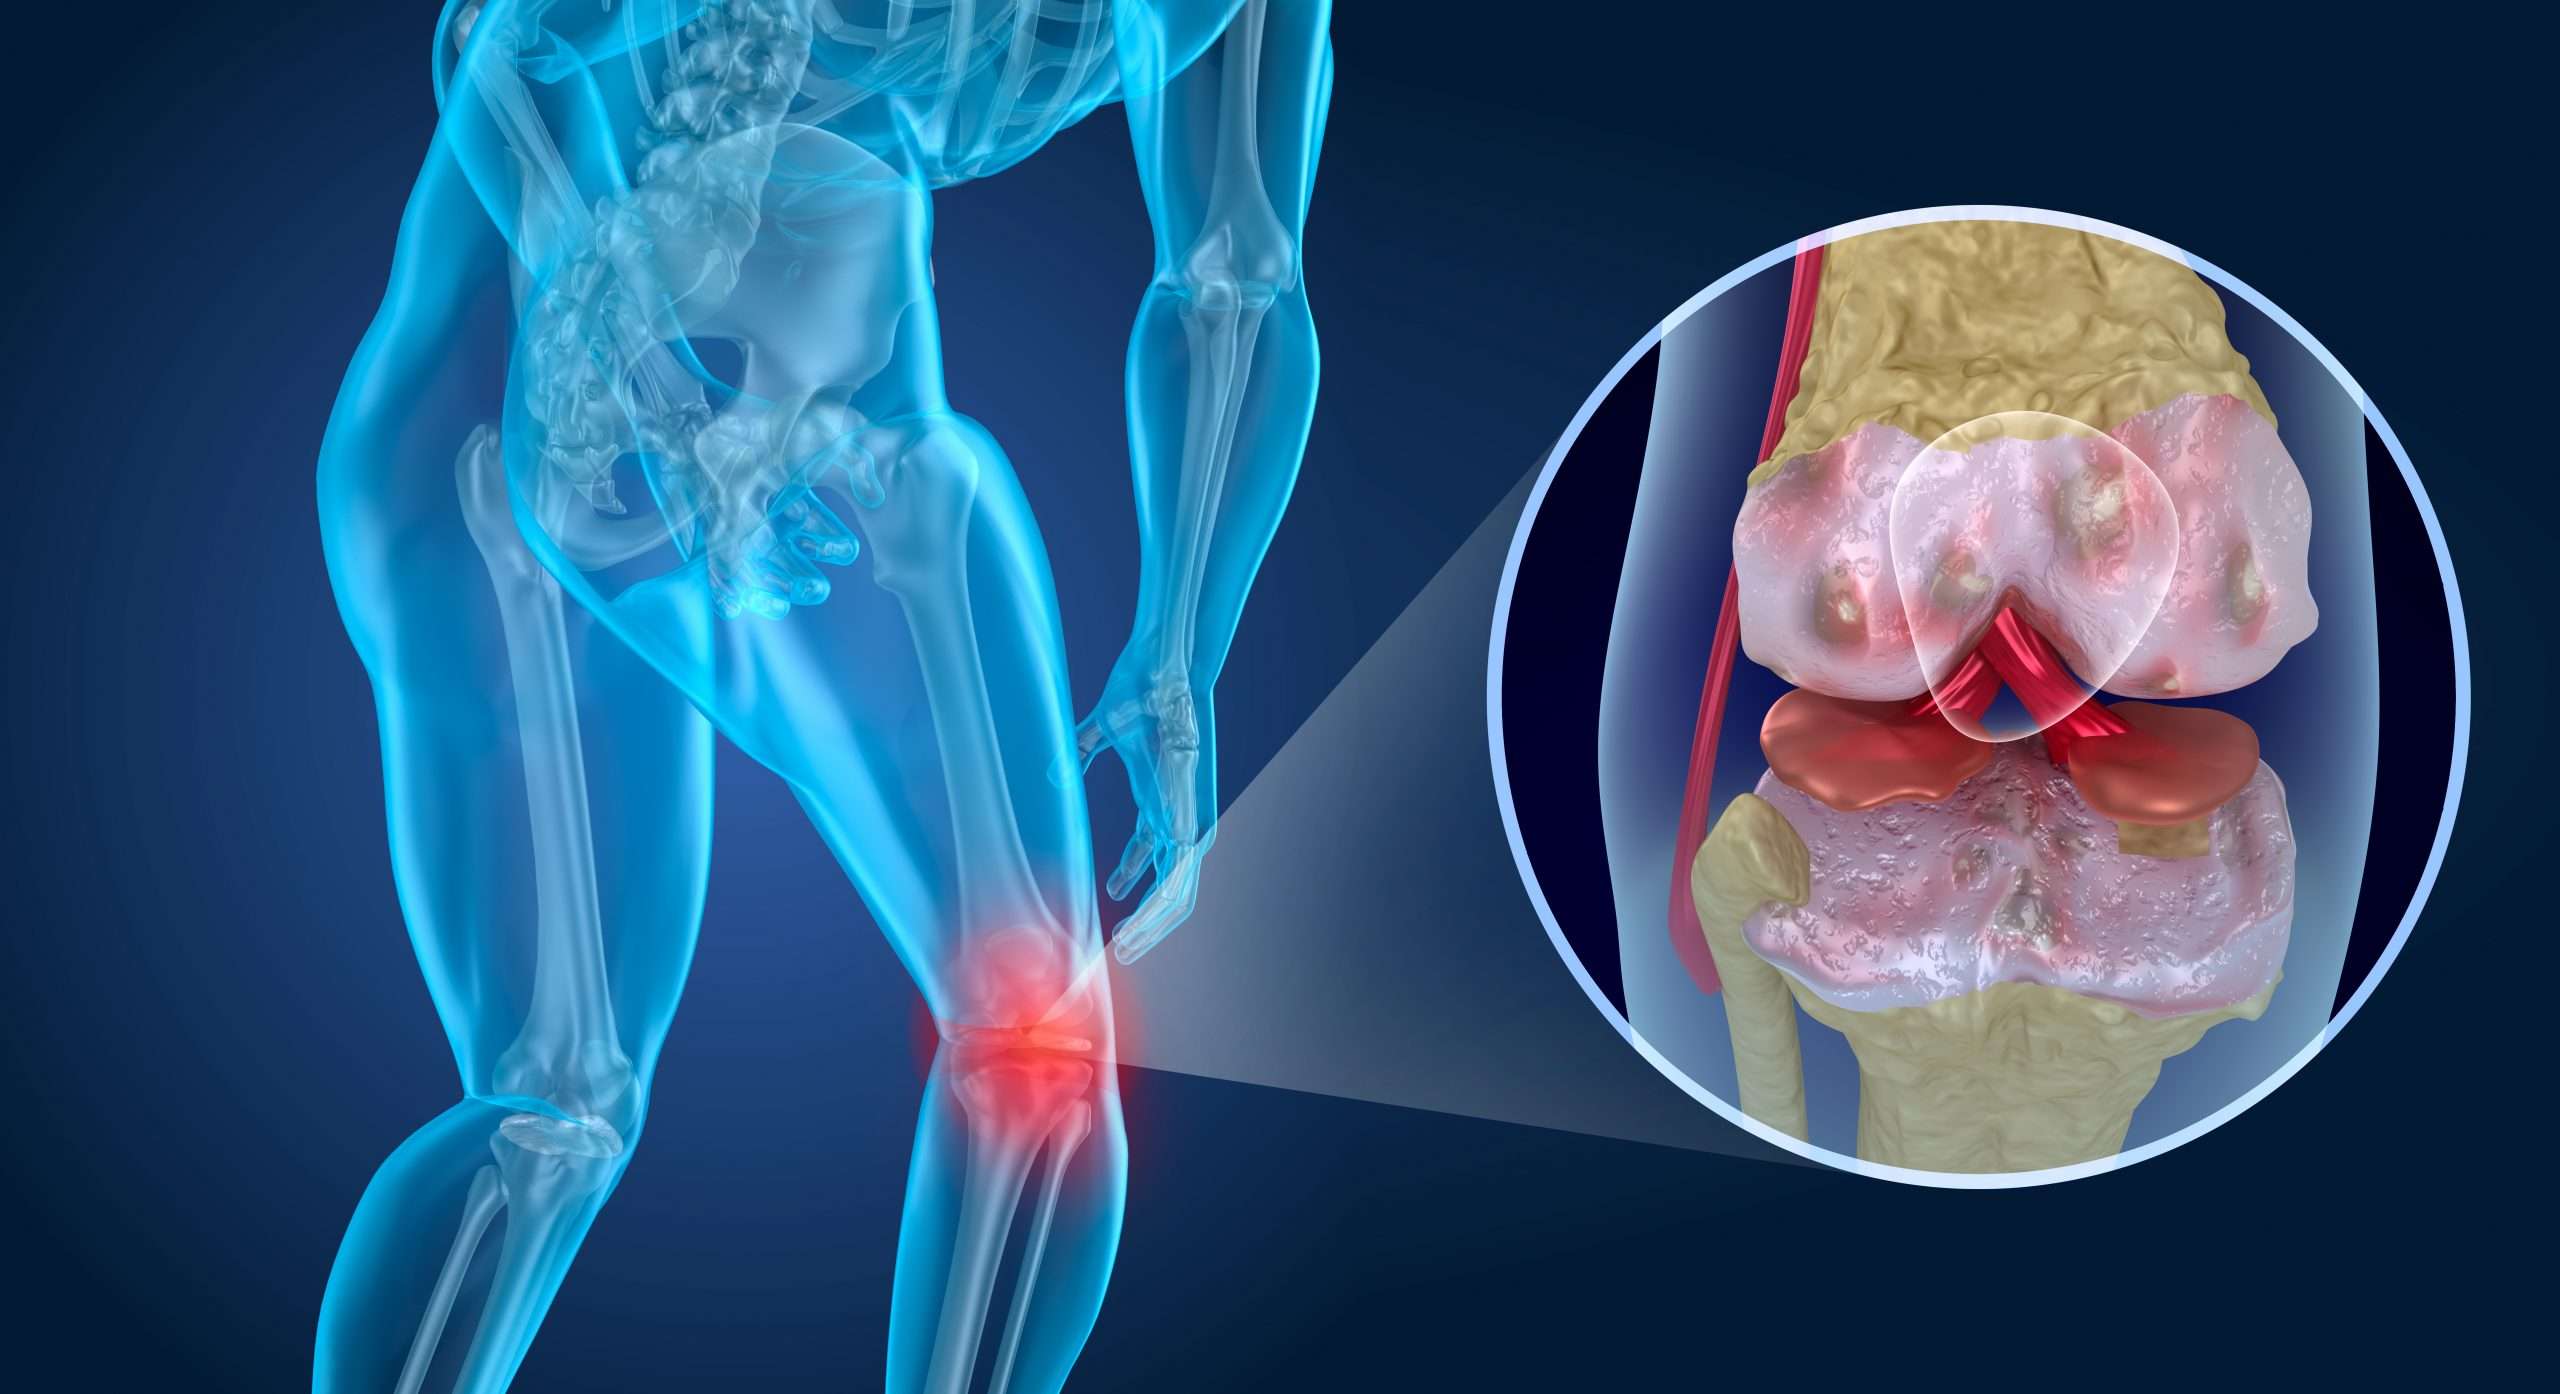 Regrow Knee Cartilage? Promising research